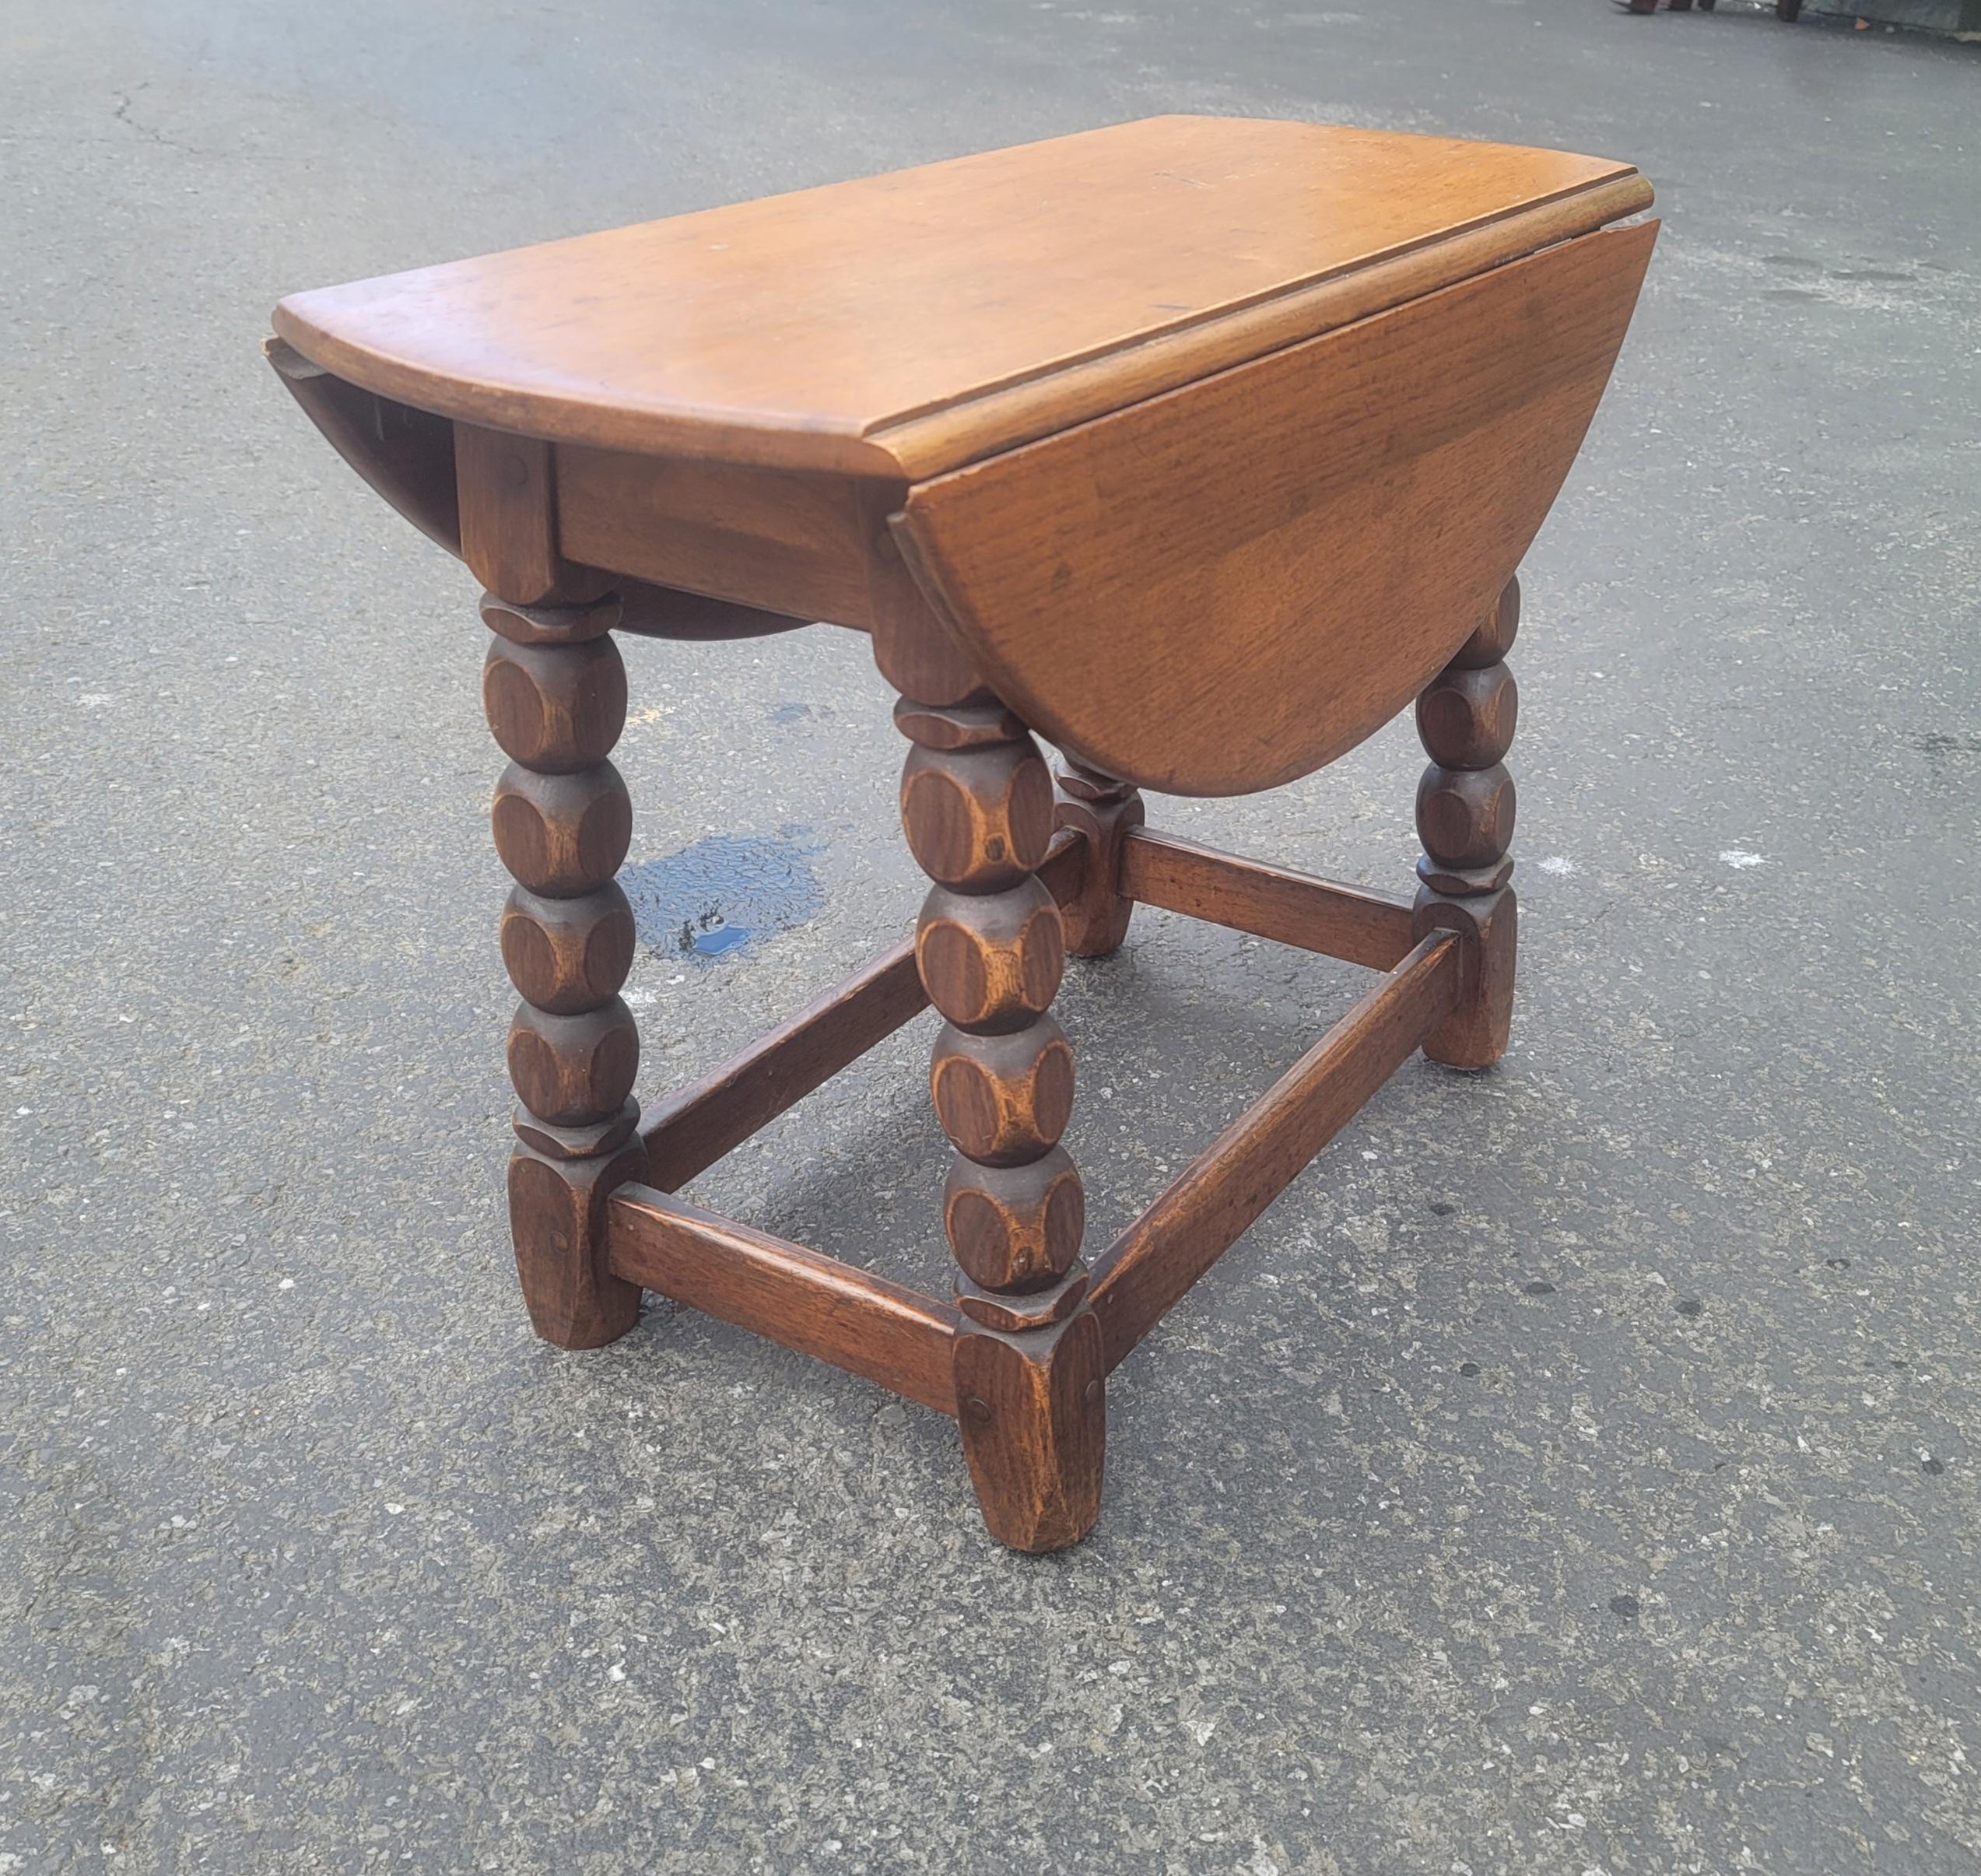 An early 20th century Jacobean low oak drop-leaf side table. Measuring 25 inches in diameter with leaves up. Table is 11.5